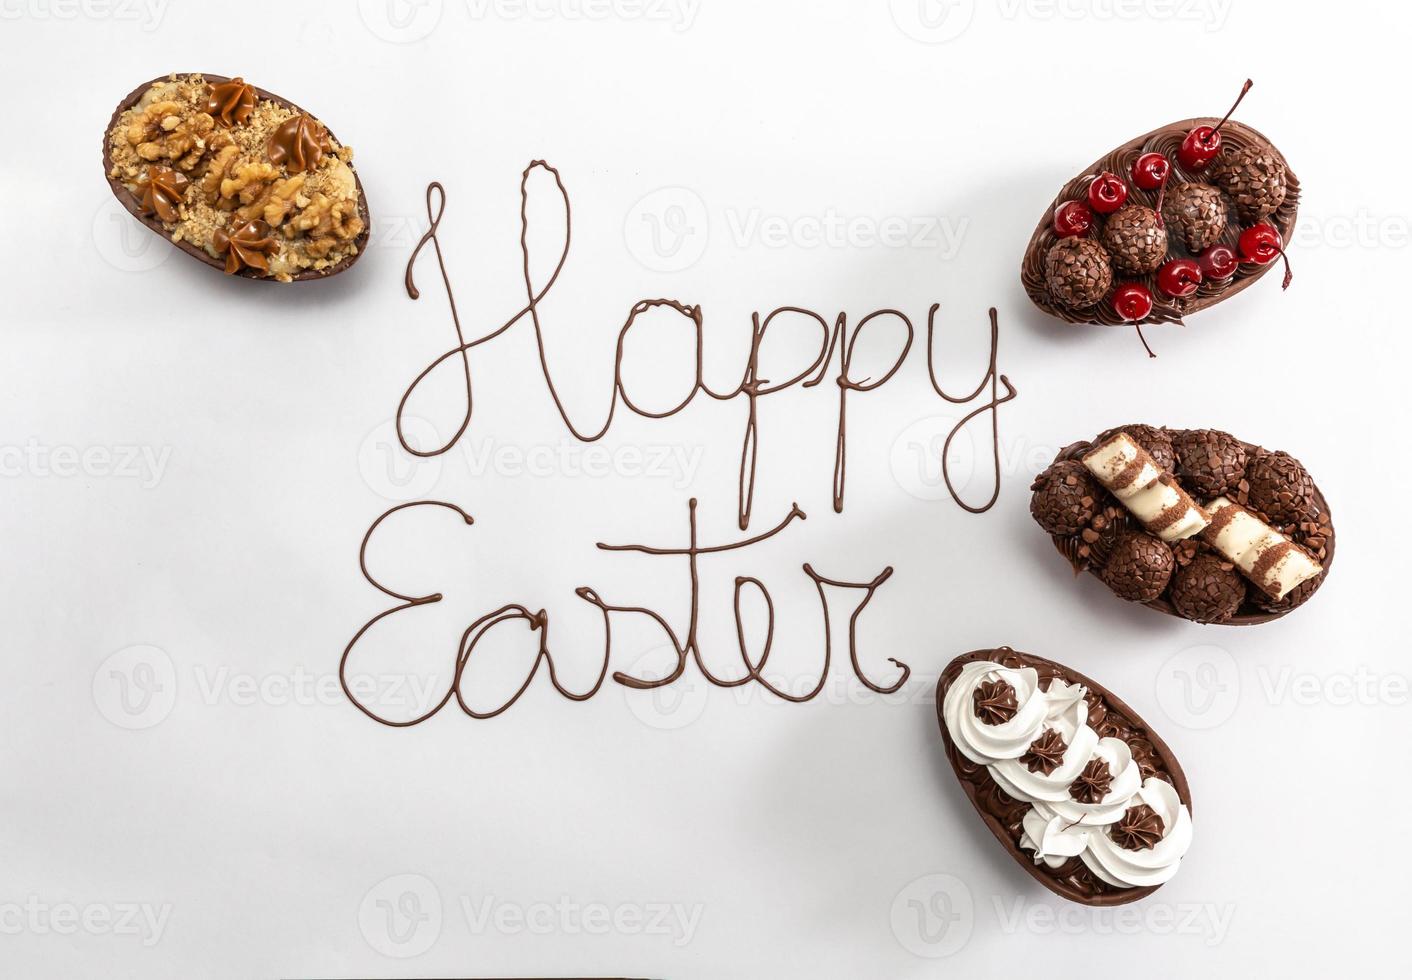 Happy Easter written with melted chocolate on white background. With gourmet Easter eggs decorating on the sides. photo